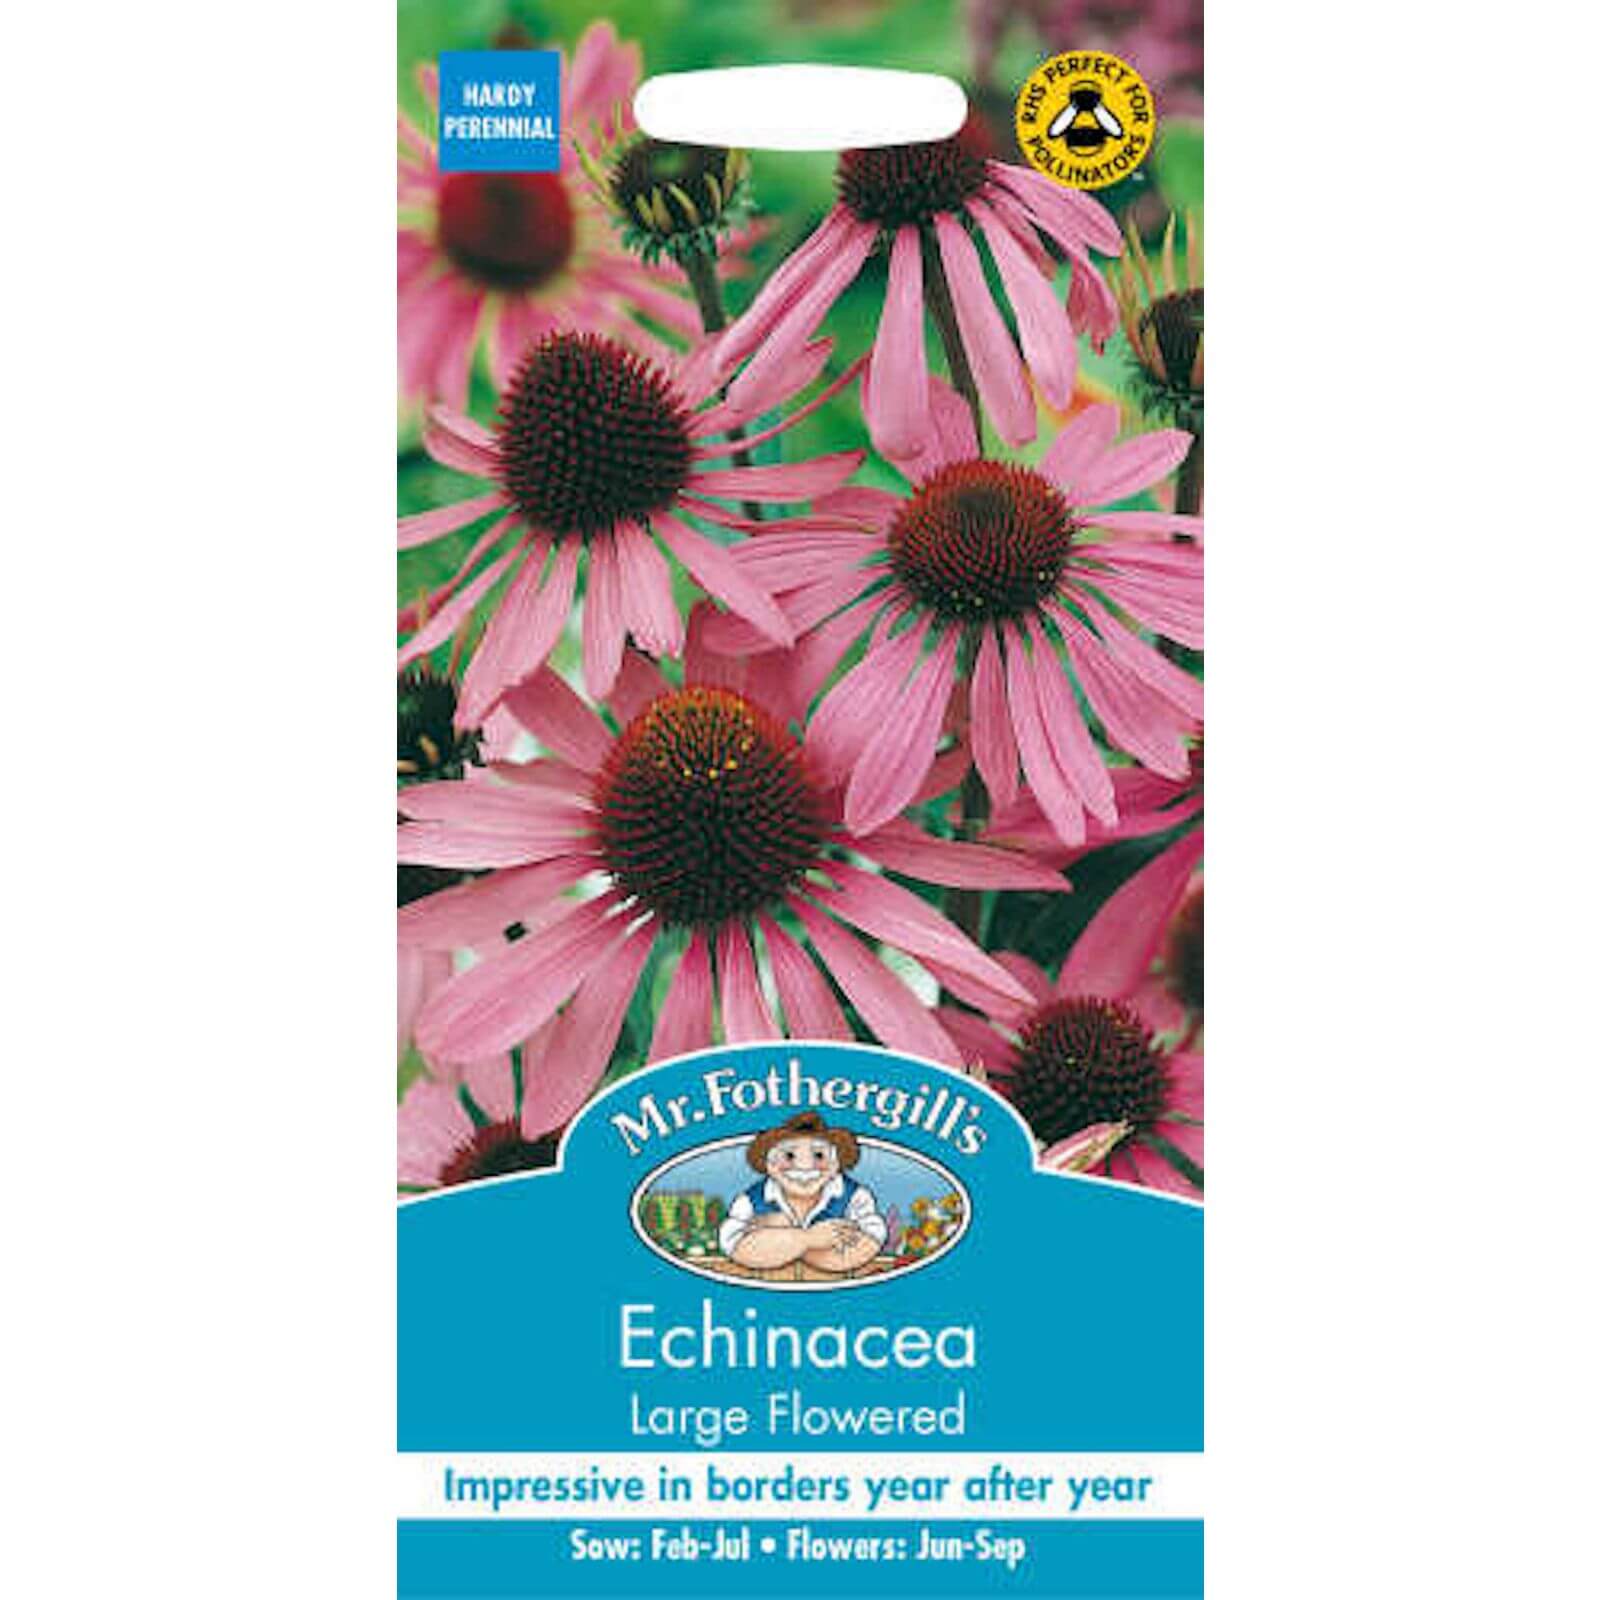 Mr. Fothergill's Echinacea Large Flowered Seed